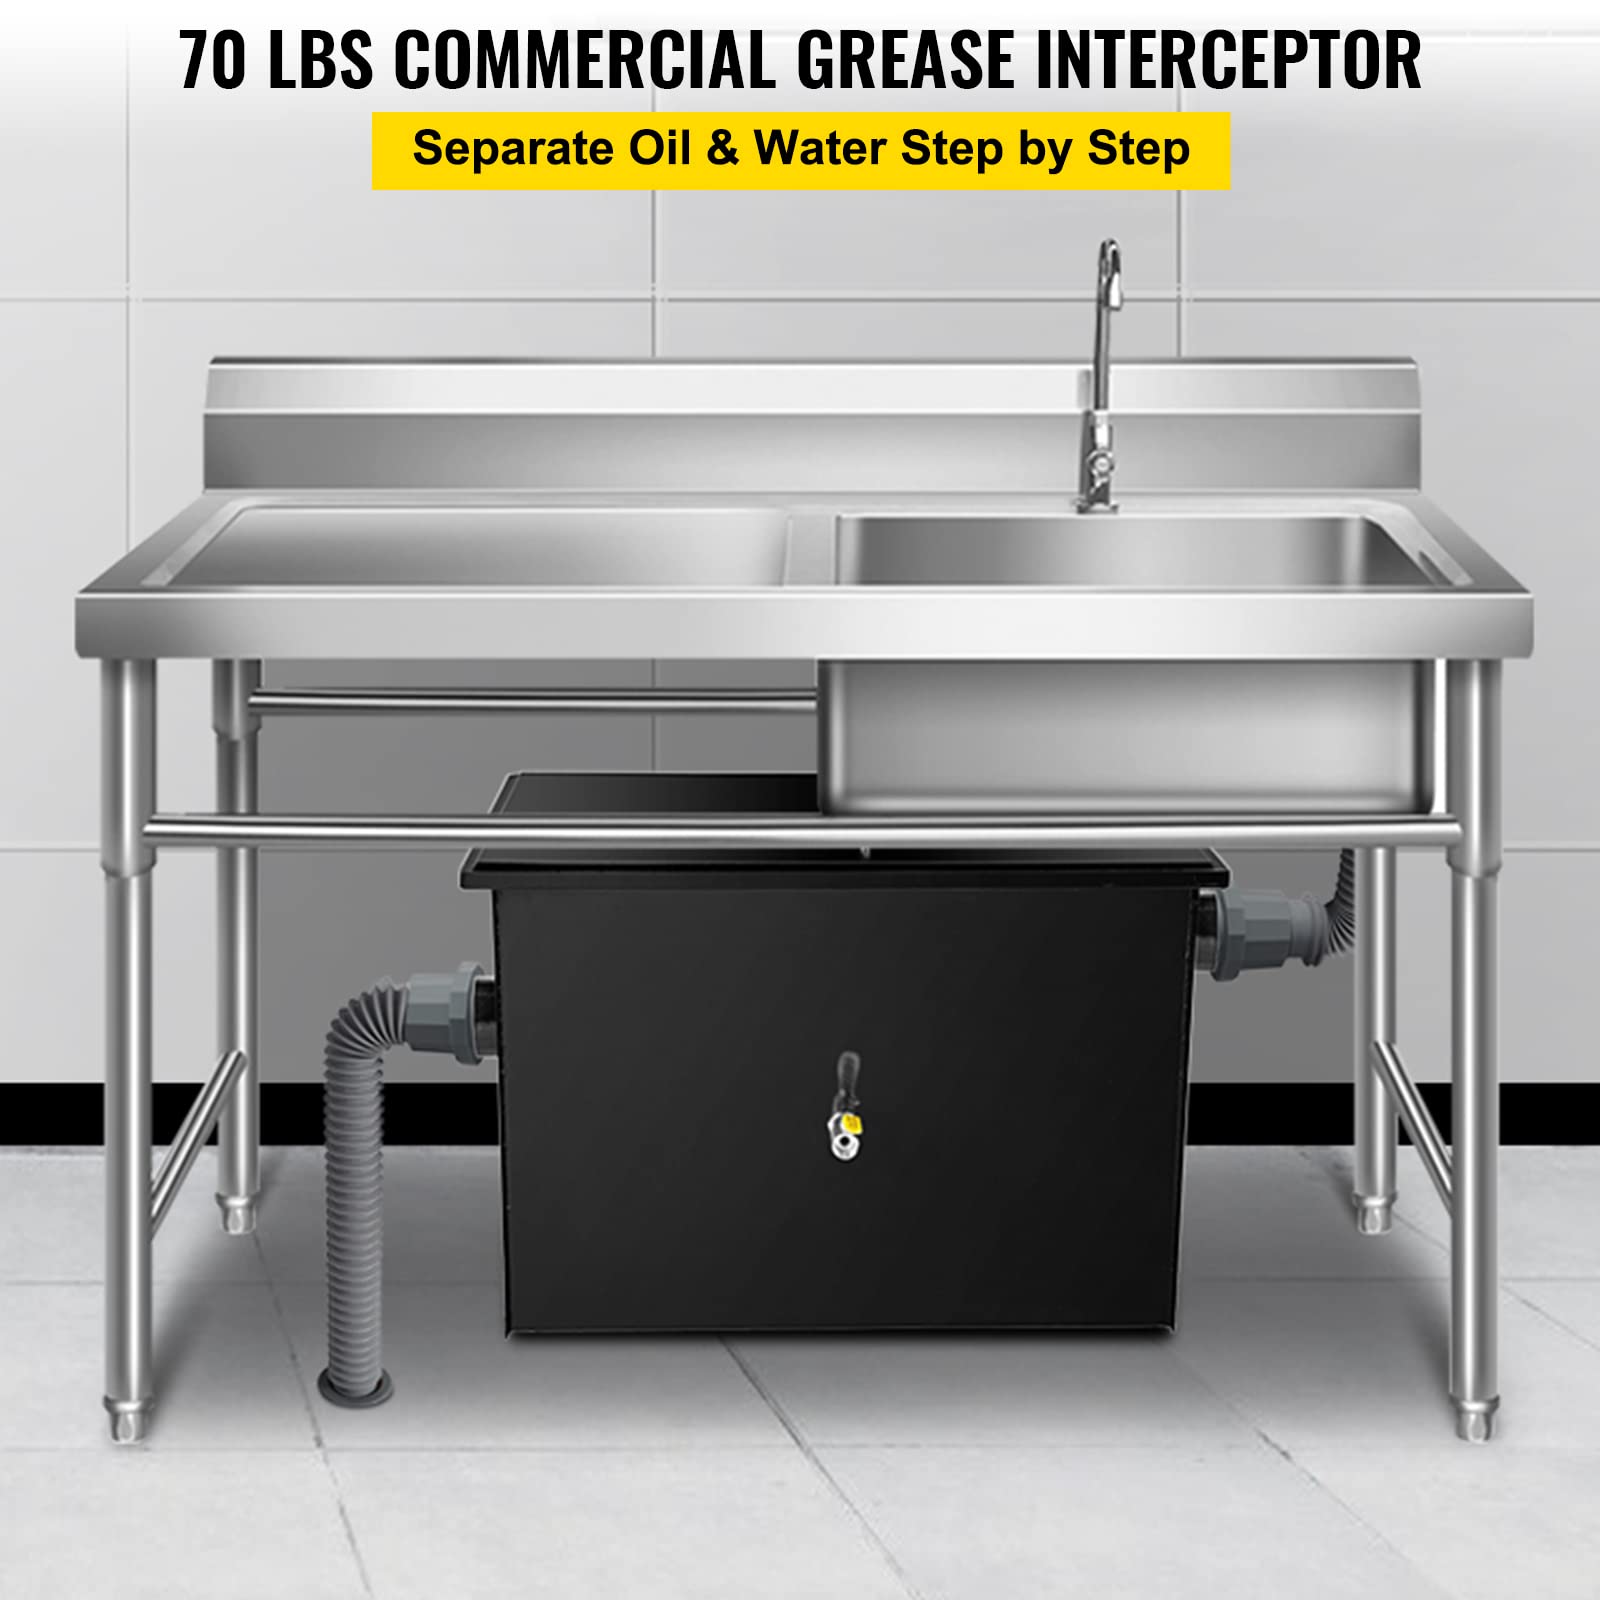 VEVOR 70 LB Commercial, Carbon Steel 35 GPM, Interceptor Side Water Inlet, Under Sink Grease Trap for Restaurant Canteen Factory Home Kitchen, Black